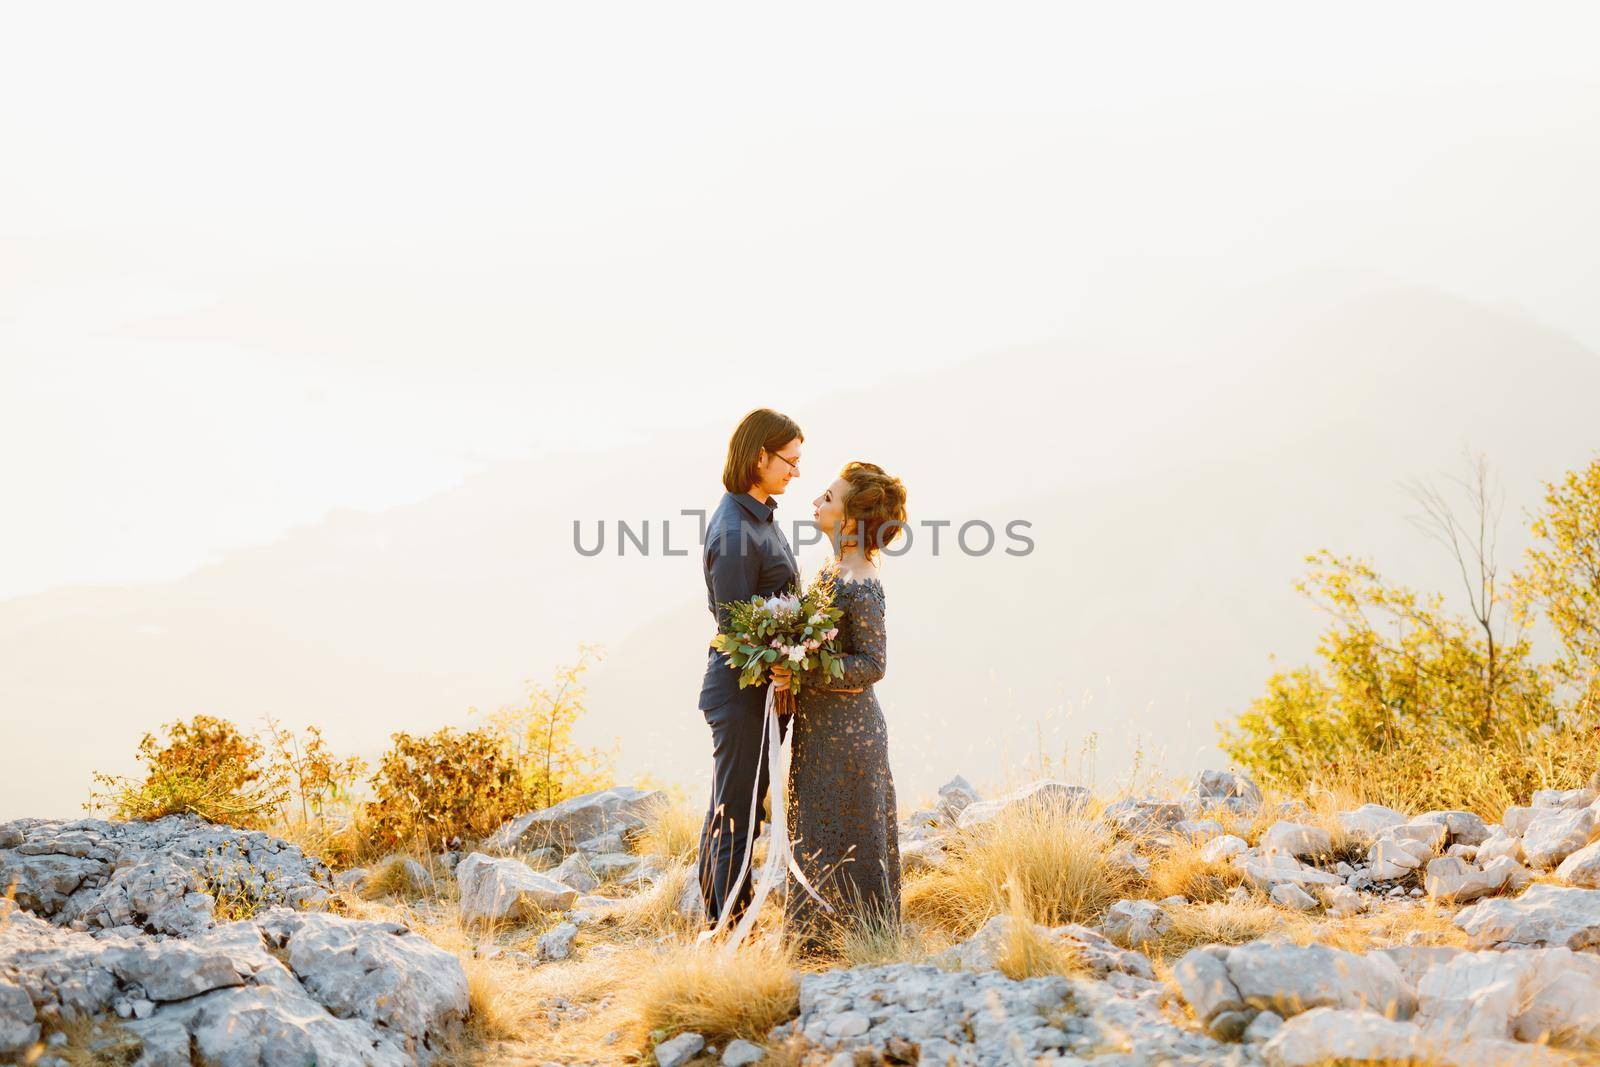 The bride and groom embracing and looking at each other on the Lovcen mountain behind them opens a view of the Bay of Kotor by Nadtochiy